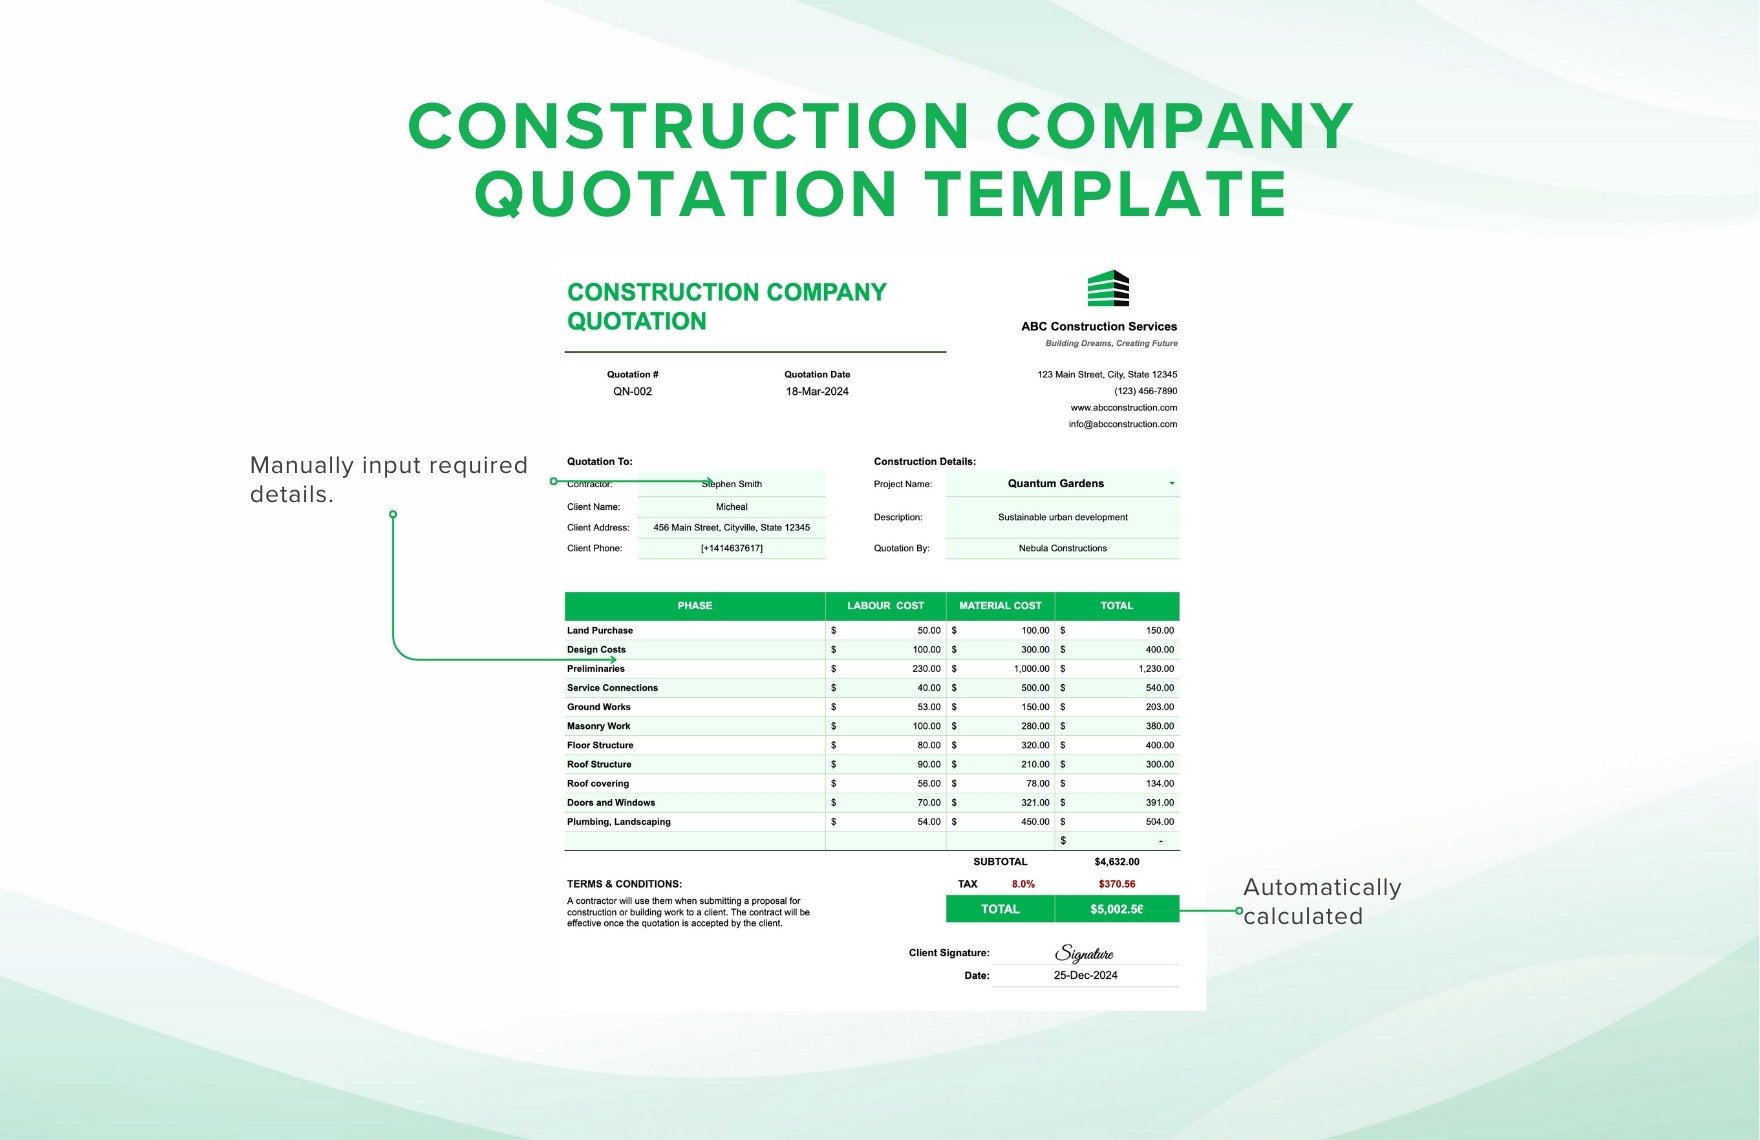 Construction Company Quotation Template